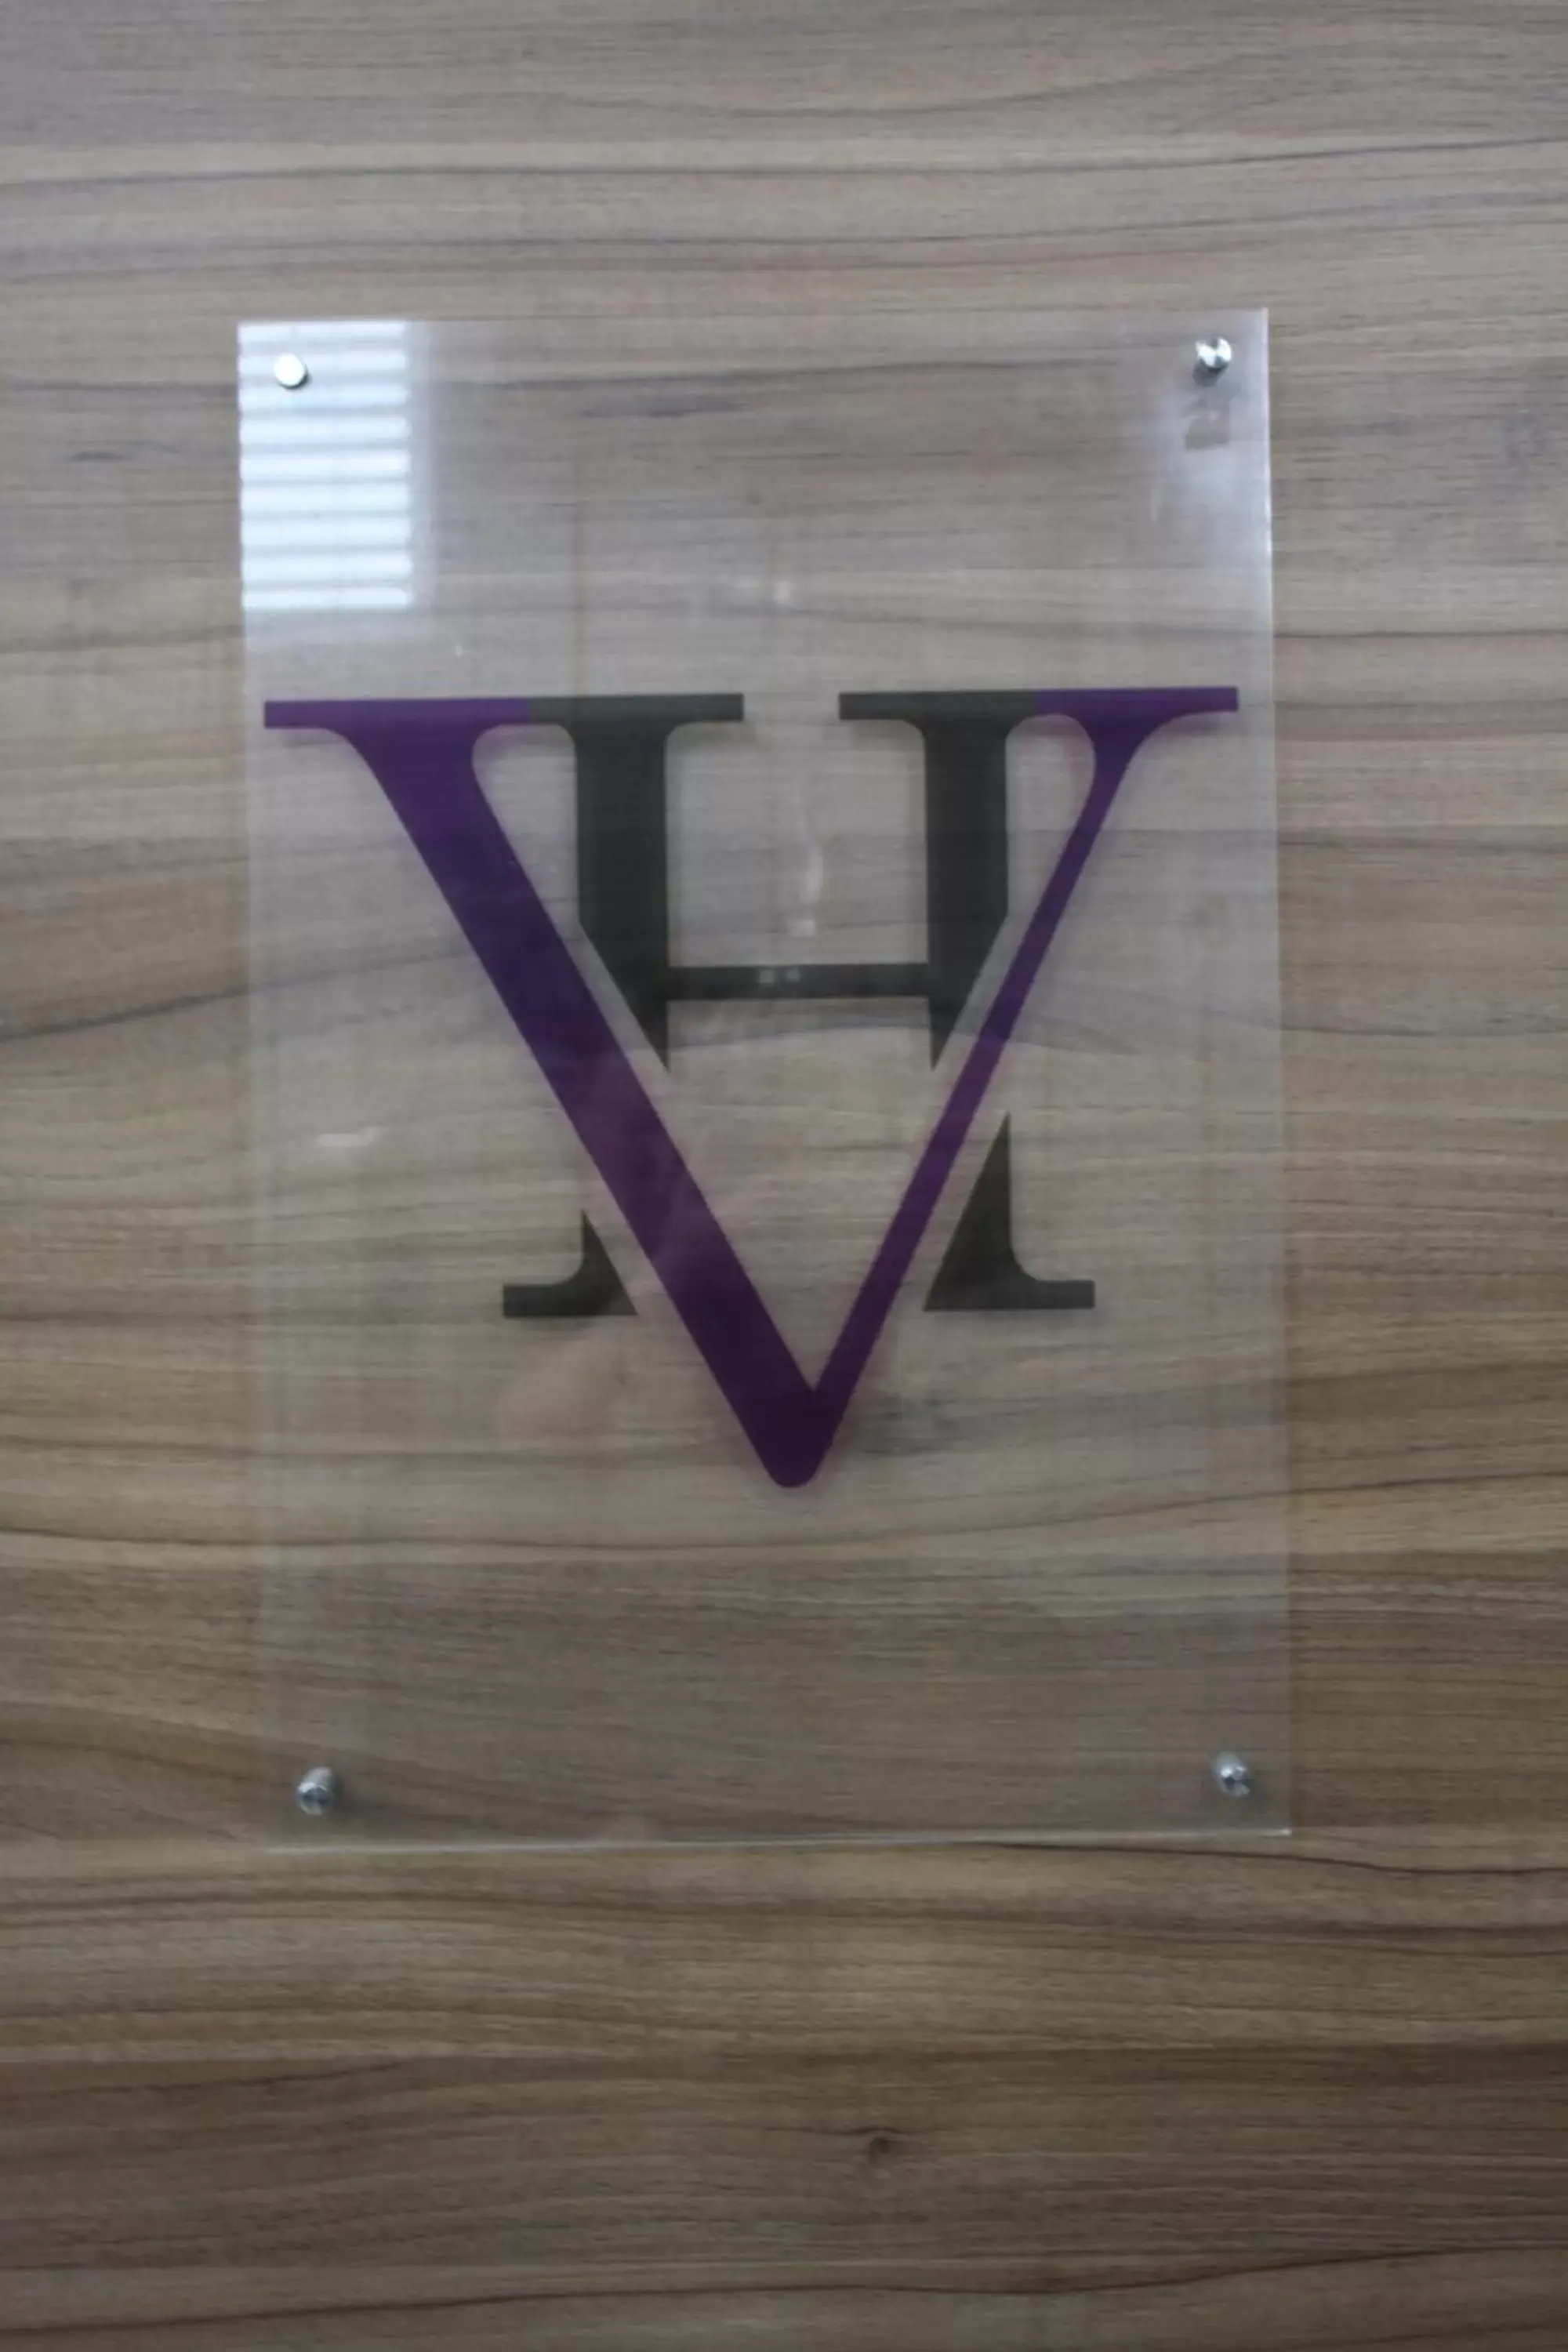 Property logo or sign in Watton Vibe Hotel